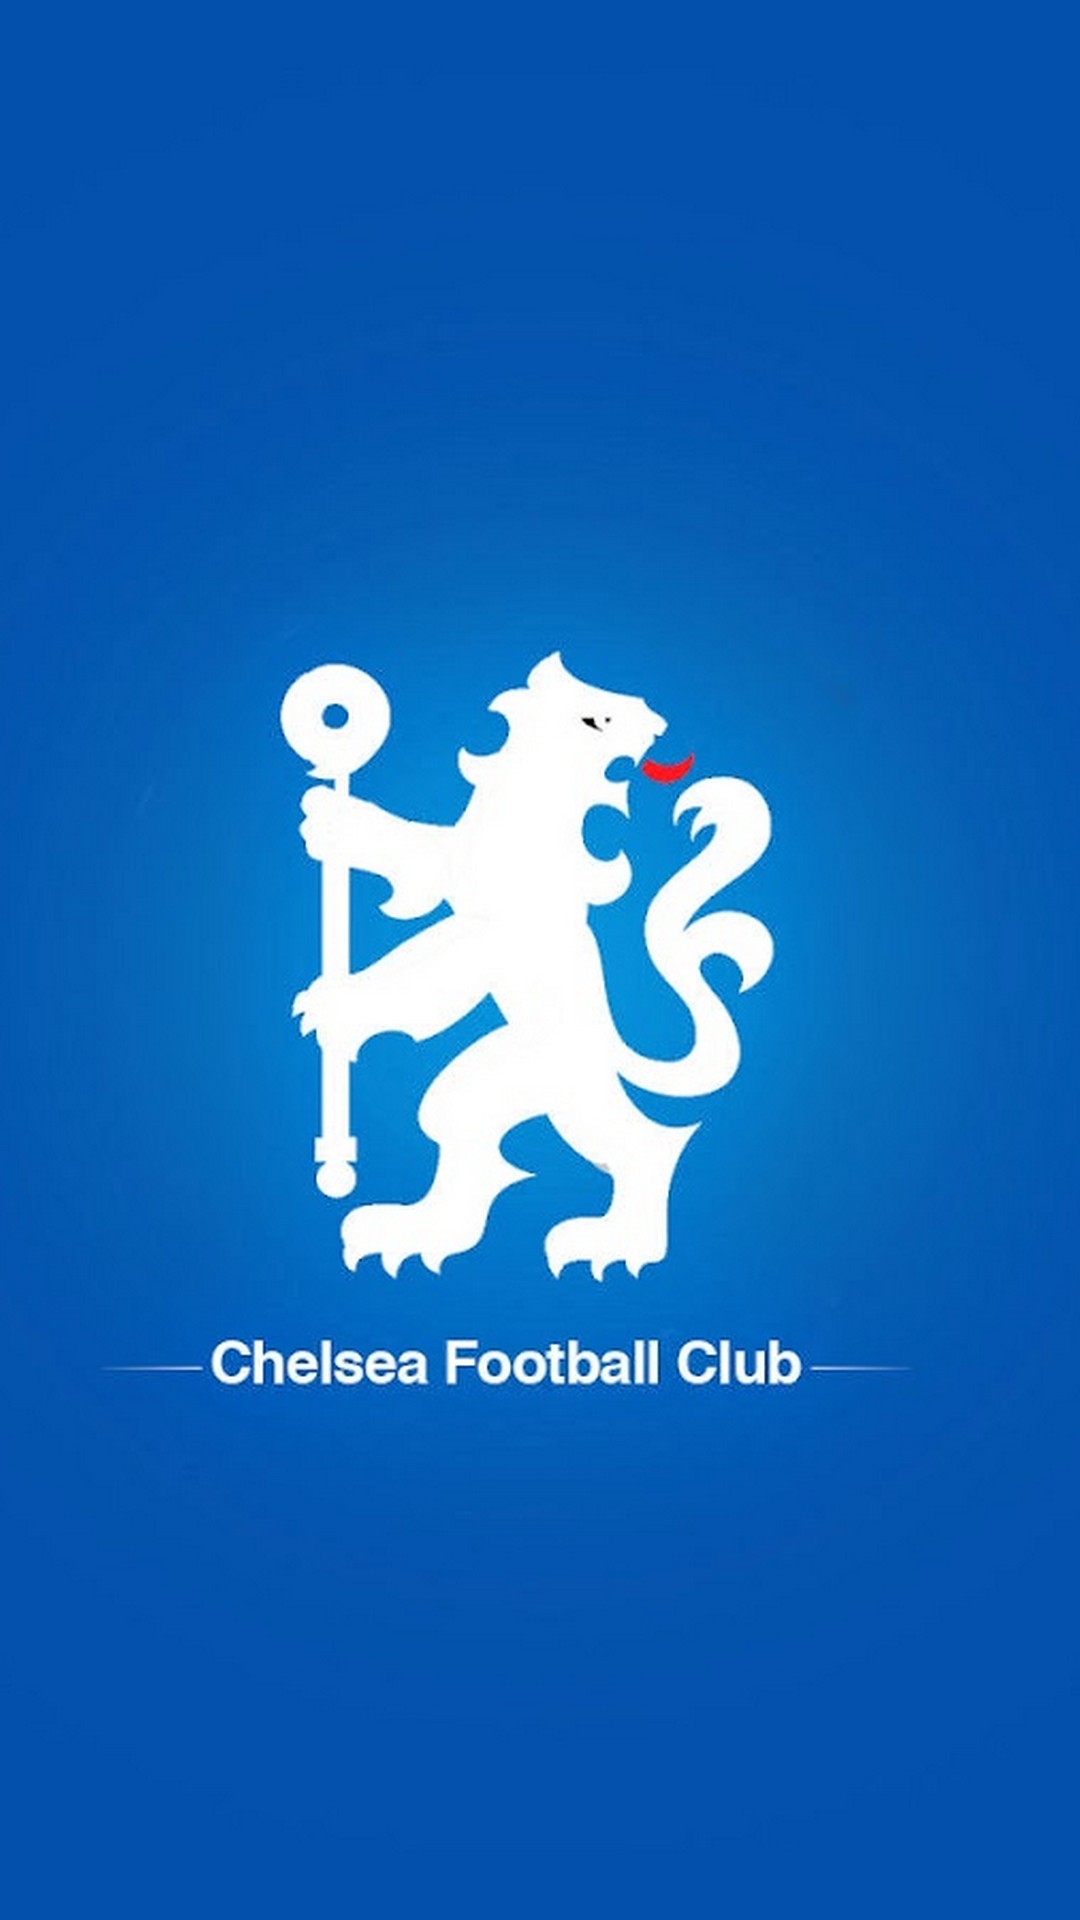 Chelsea Football Club HD Wallpaper For iPhone with resolution 1080x1920 pixel. You can make this wallpaper for your Mac or Windows Desktop Background, iPhone, Android or Tablet and another Smartphone device